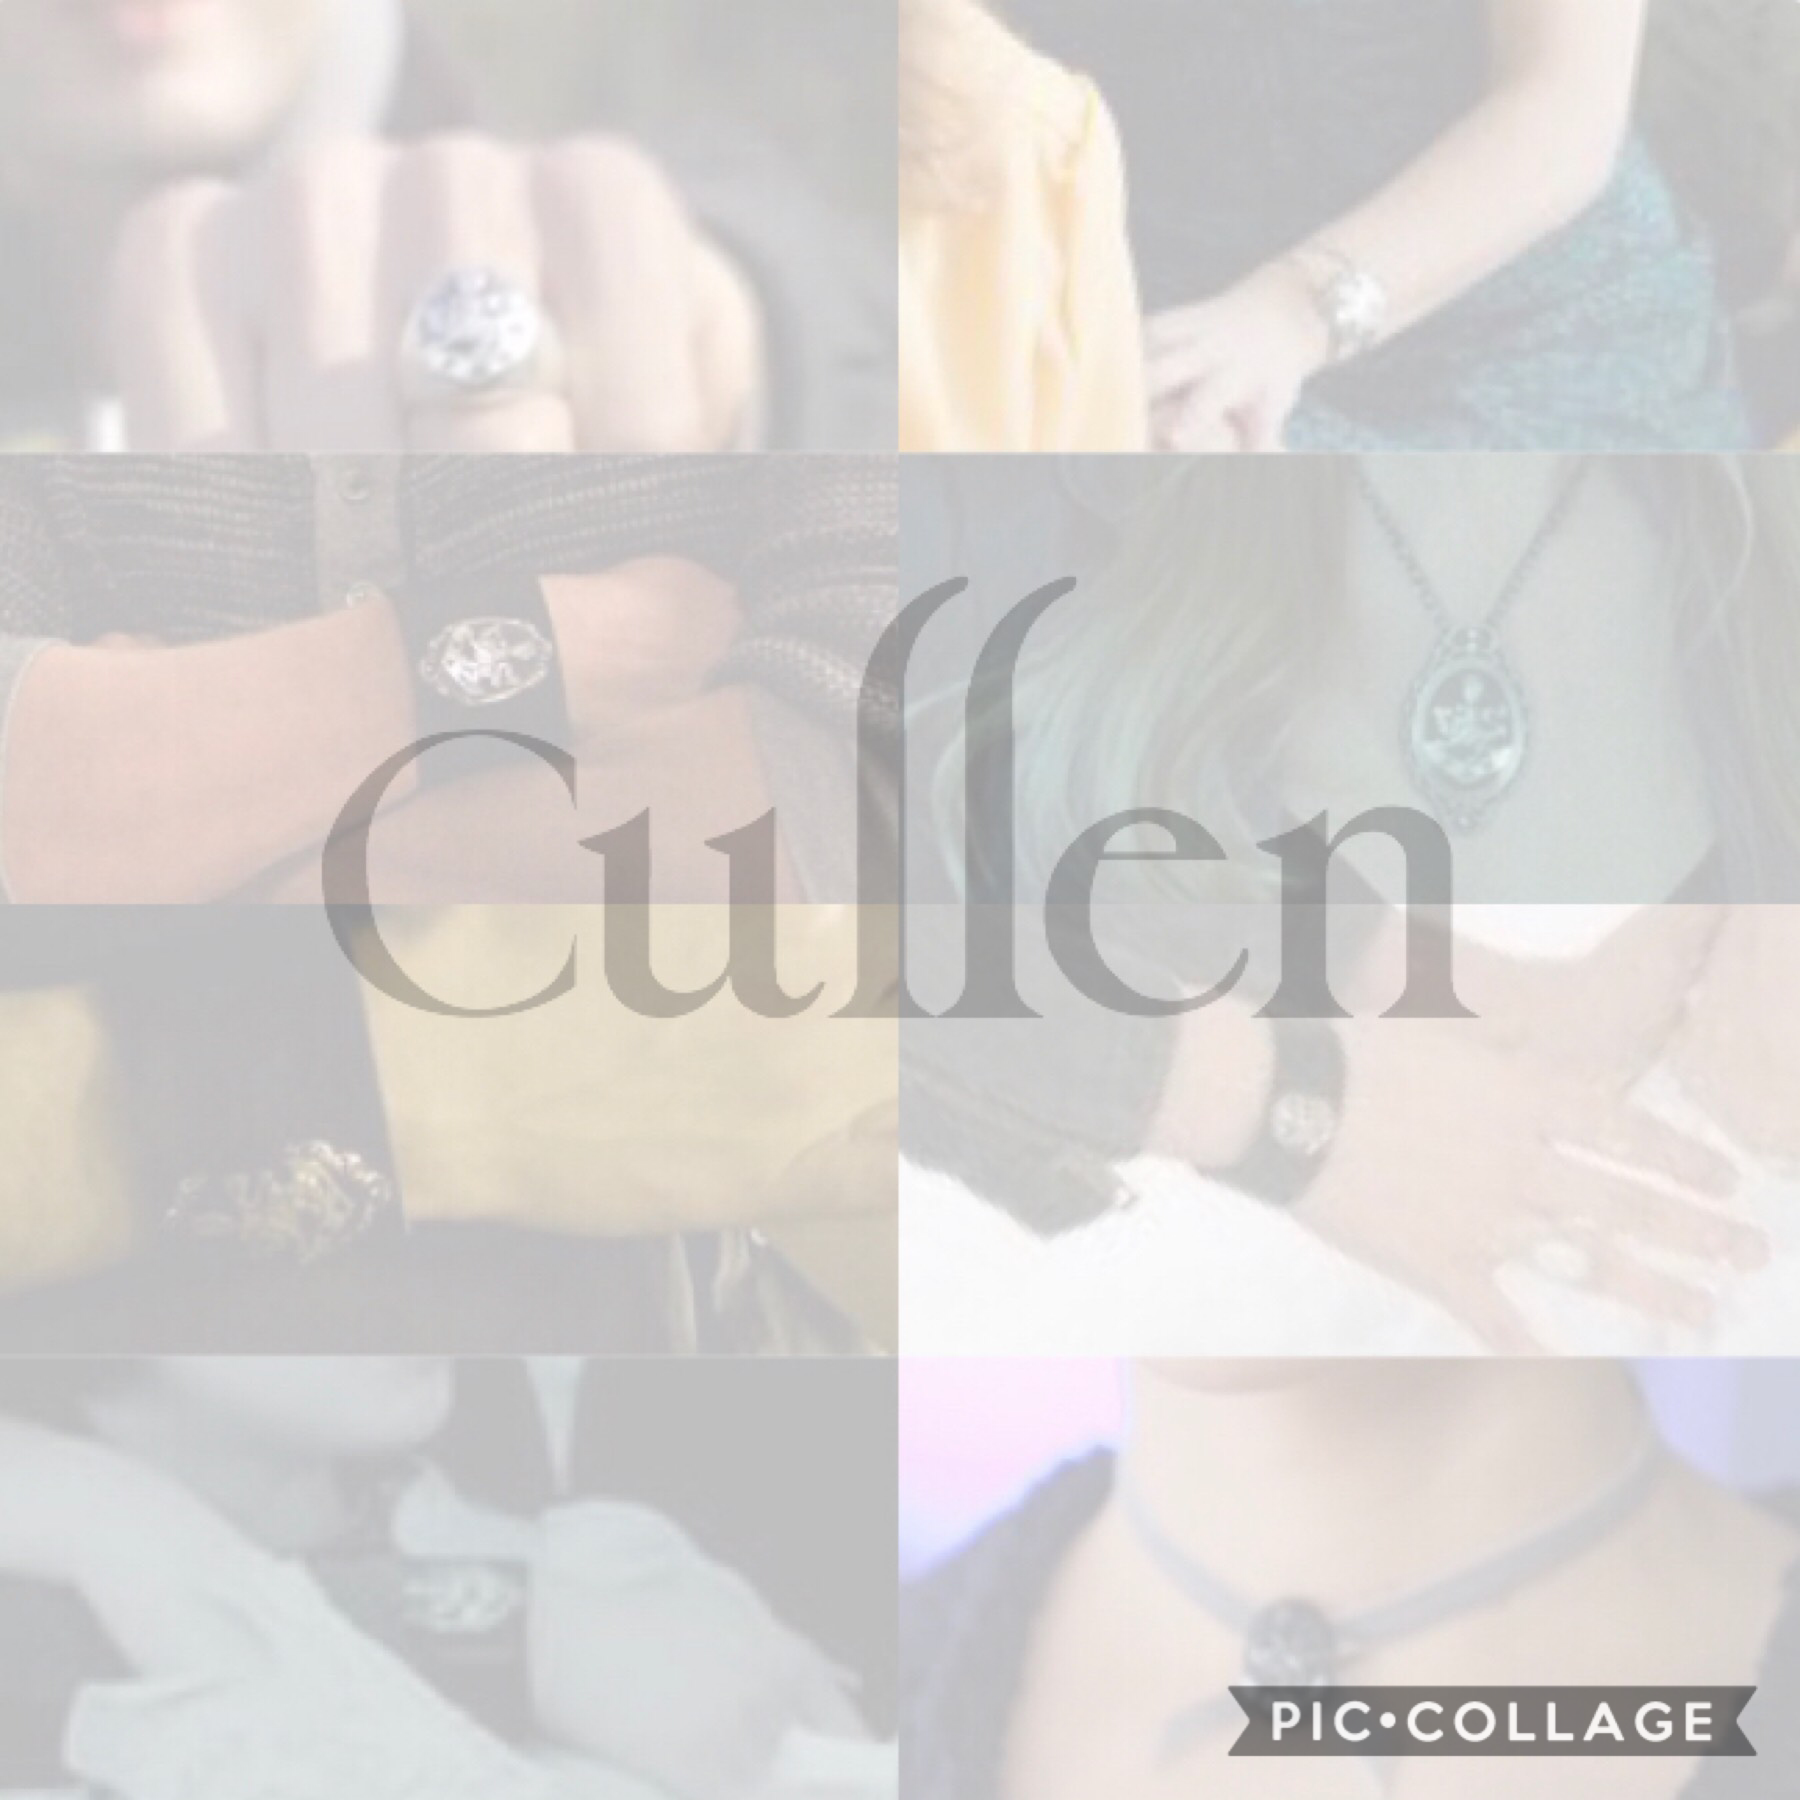 HAPPY NEW YEAR EVERYONE! 
Fun fact: as u may have noticed in the movies, all the Cullens wear a piece of jewelry containing the Cullen crest! And in Breaking Dawn Part Two, we see that Bella now has one also!❤️